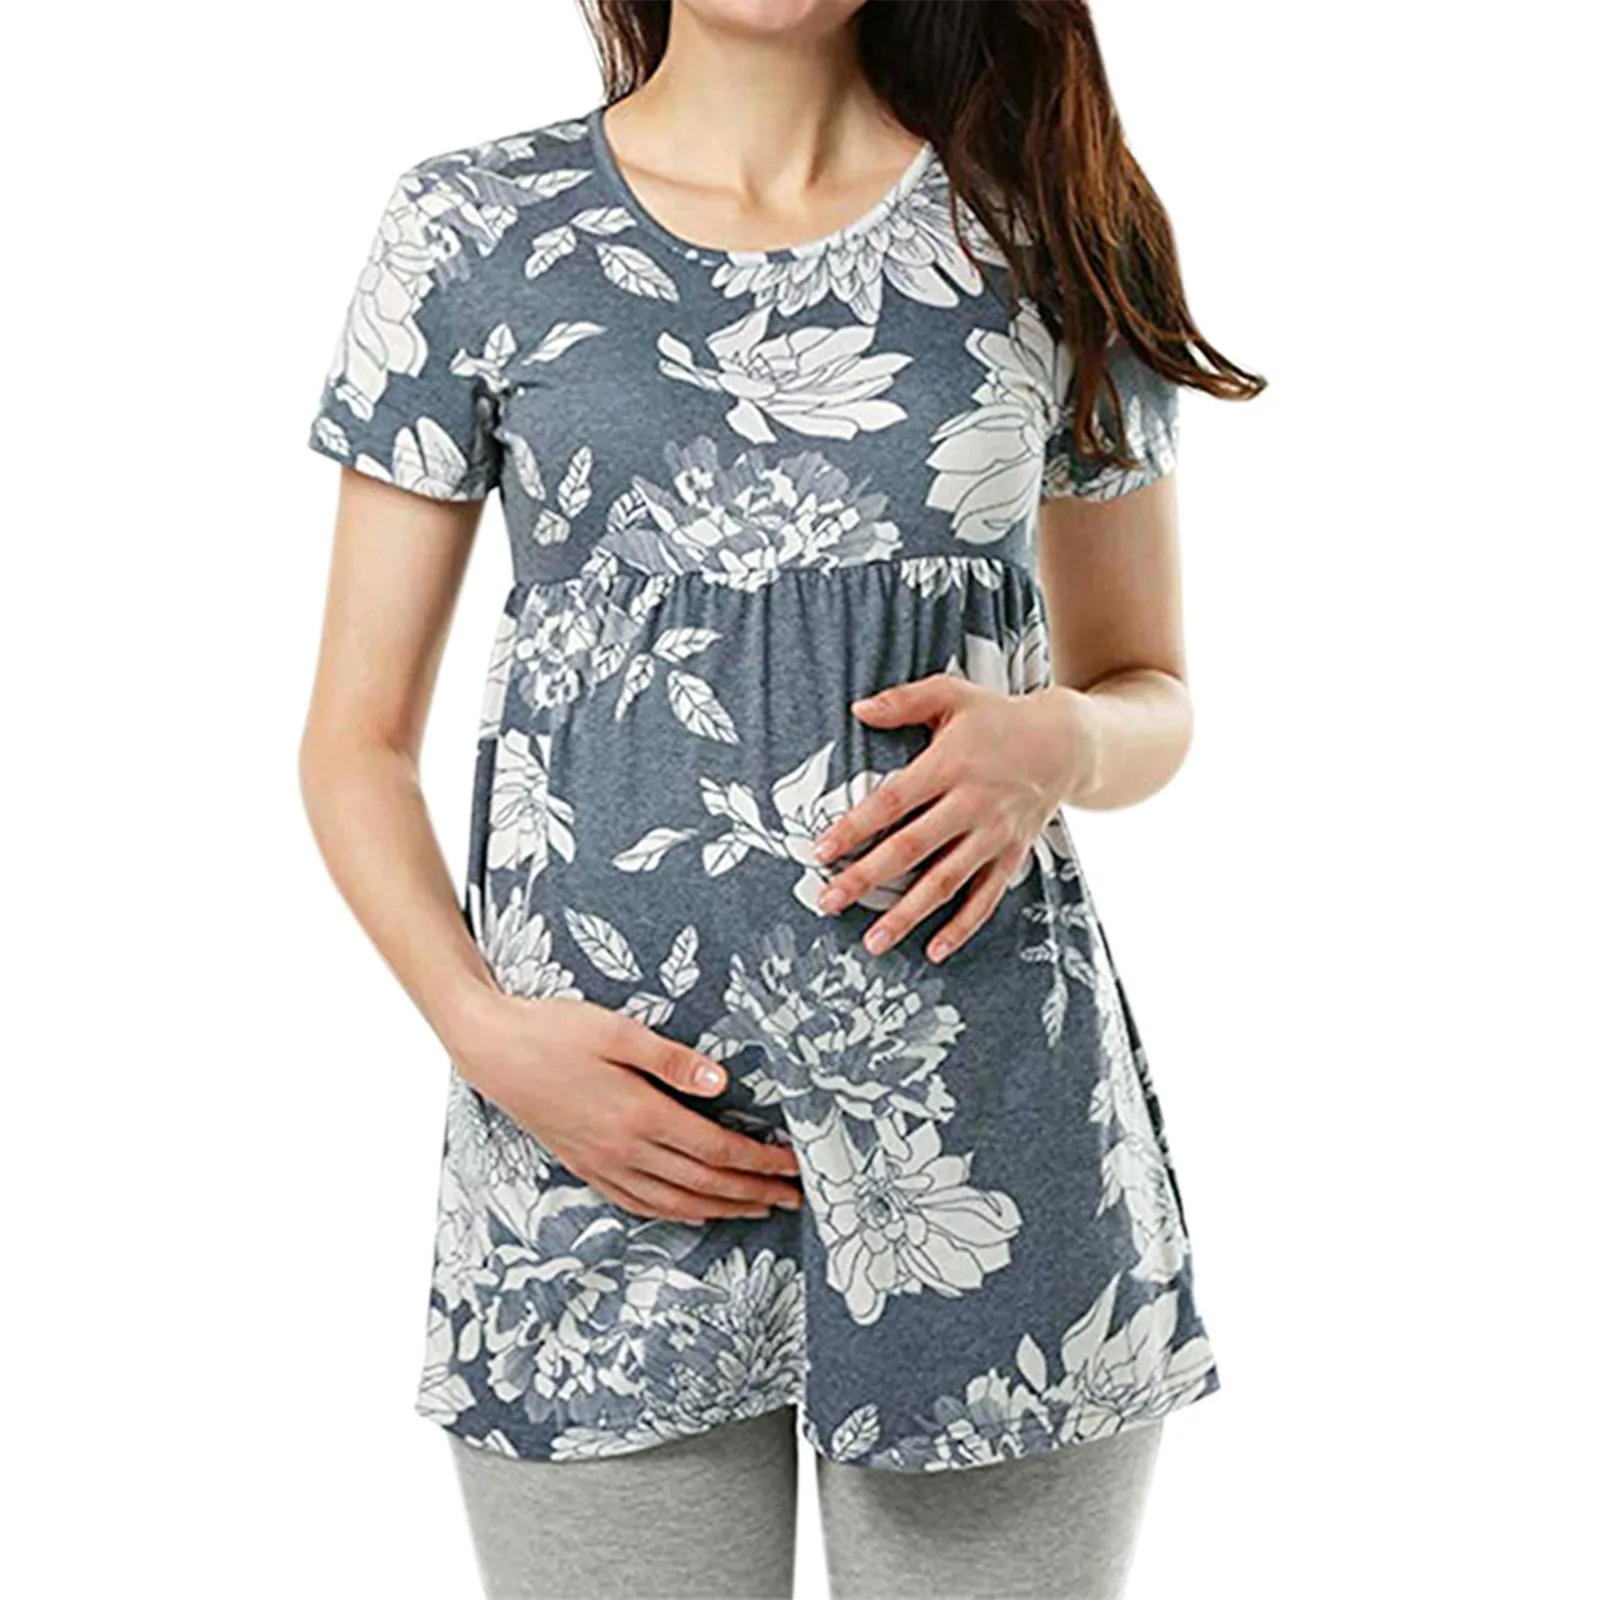 

Womens Pregnancy Clothes Maternity Casual Short Sleeve Flower Print T Shirt Tops Pregnant Tunic Blouse embarazo y maternidad